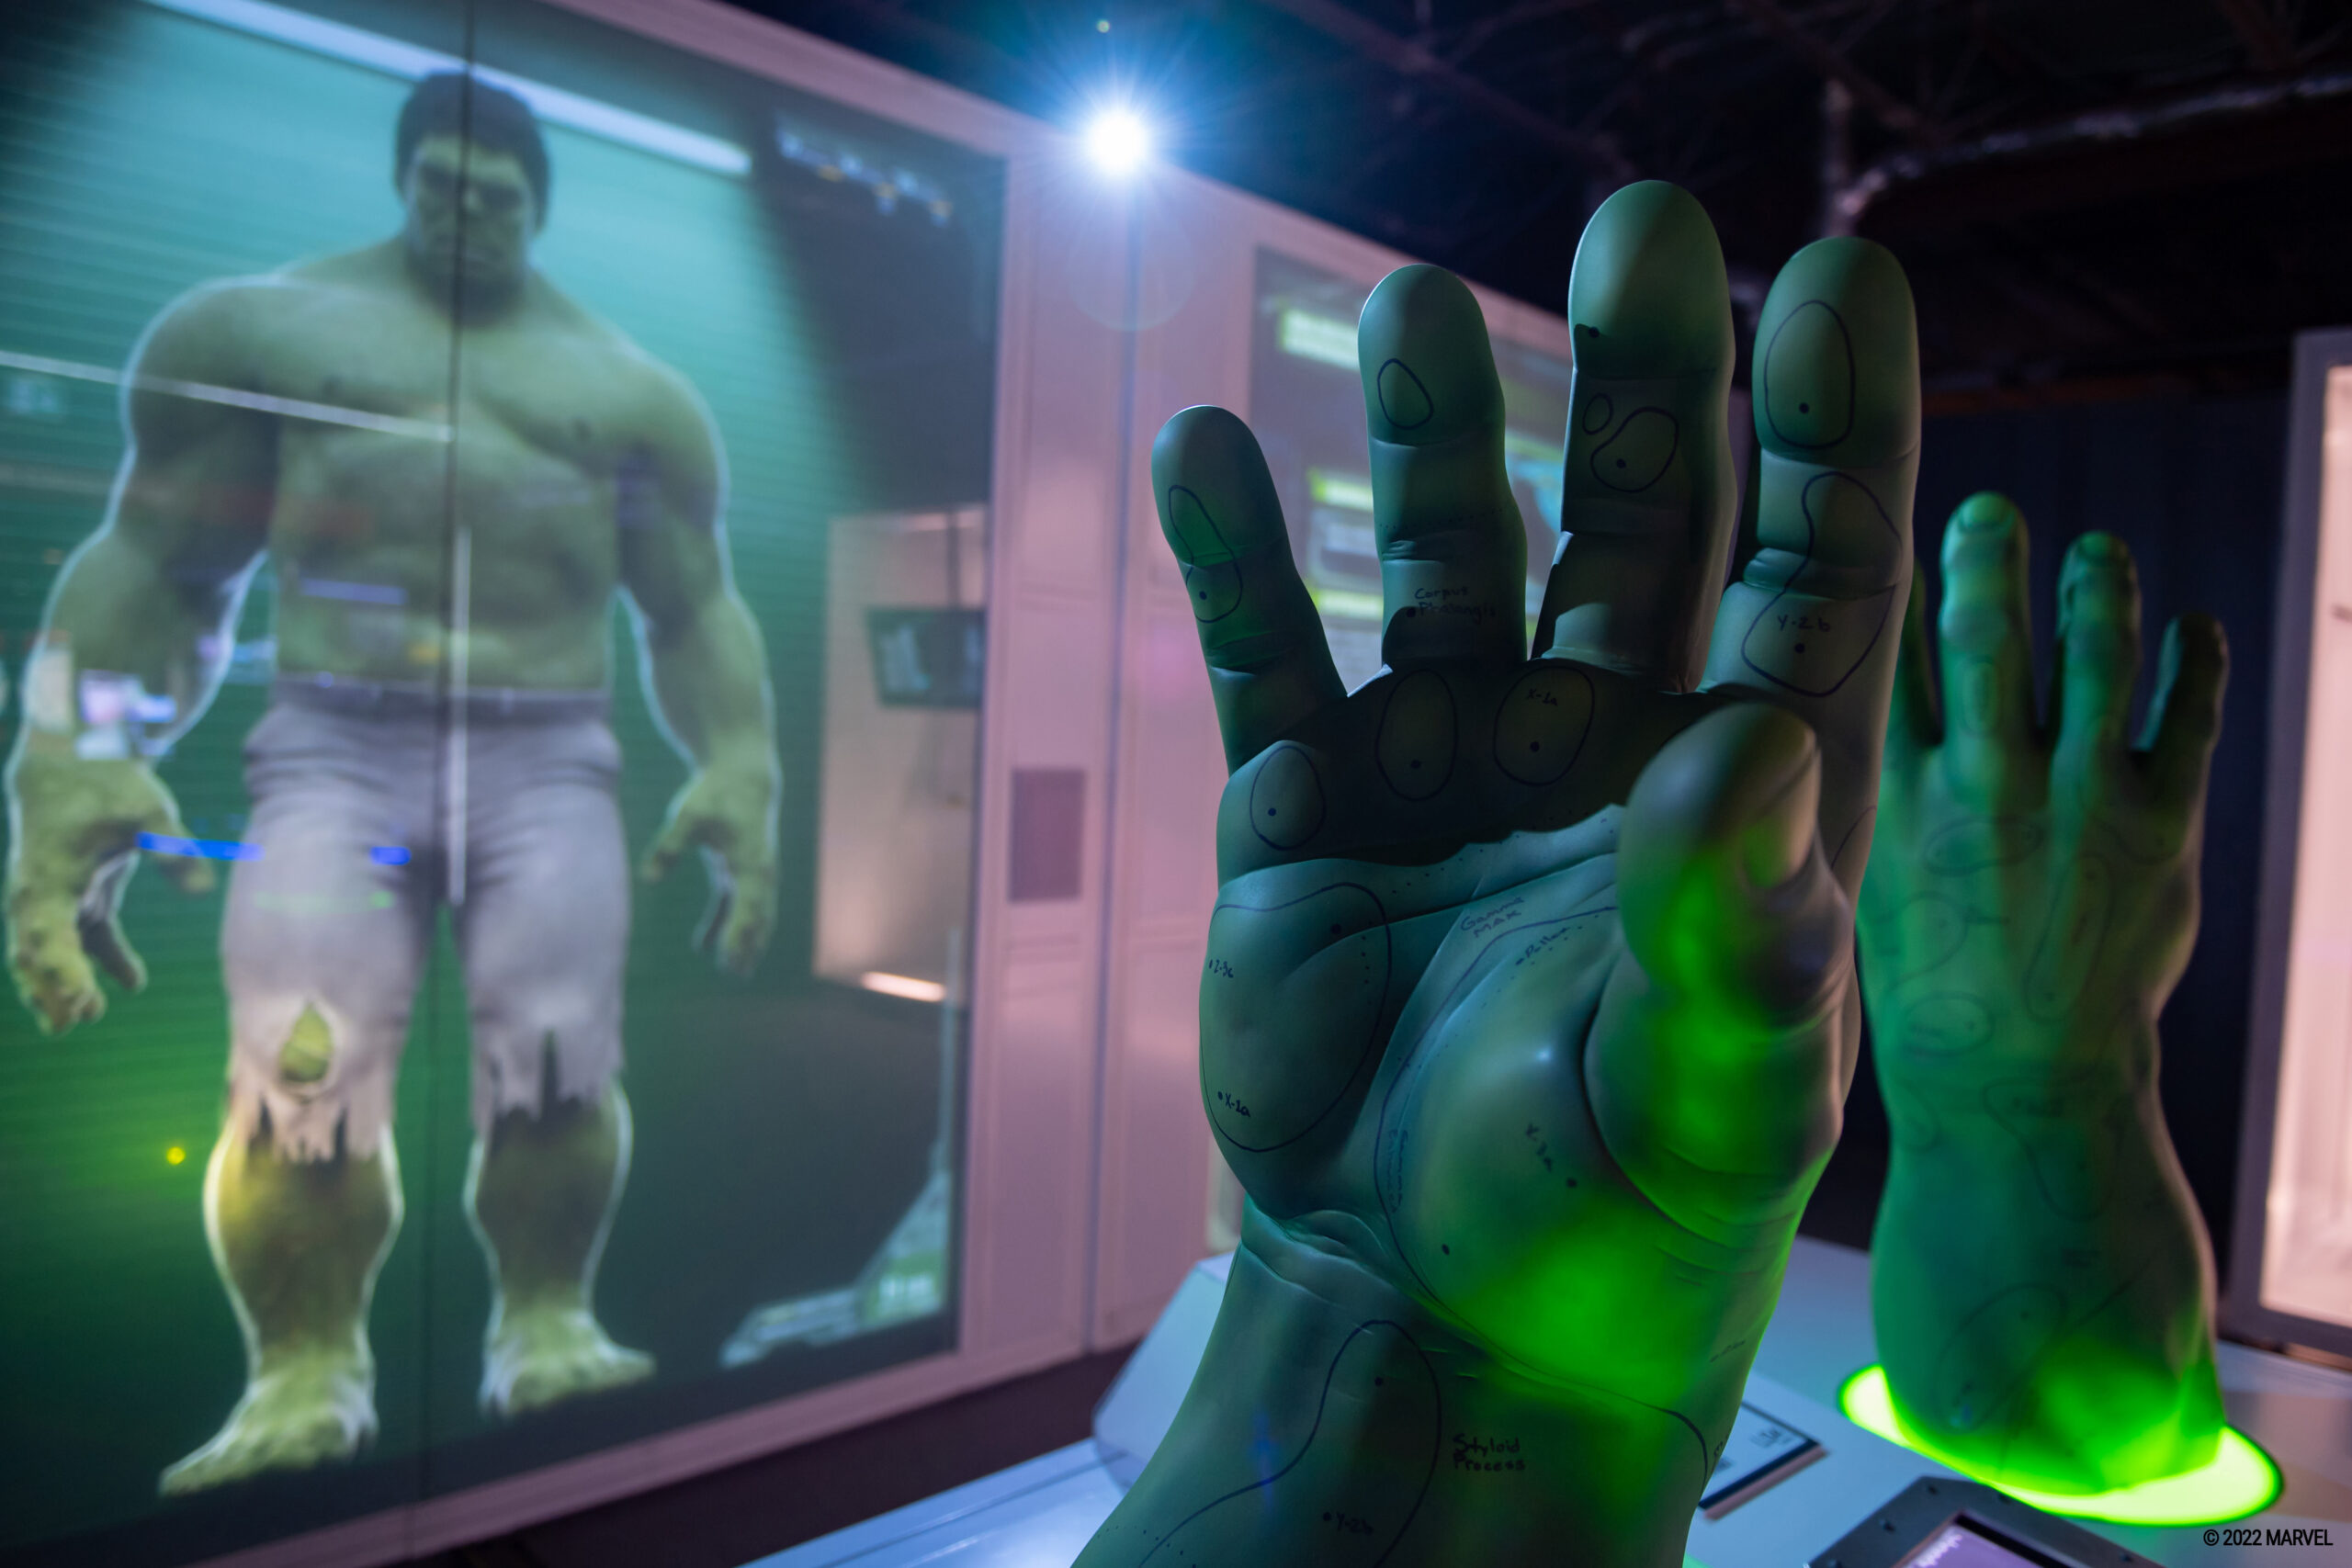 Avengers Assemble! An exhibit of super hero proportions is coming to Burnaby! Marvel Avengers S.T.A.T.I.O.N.